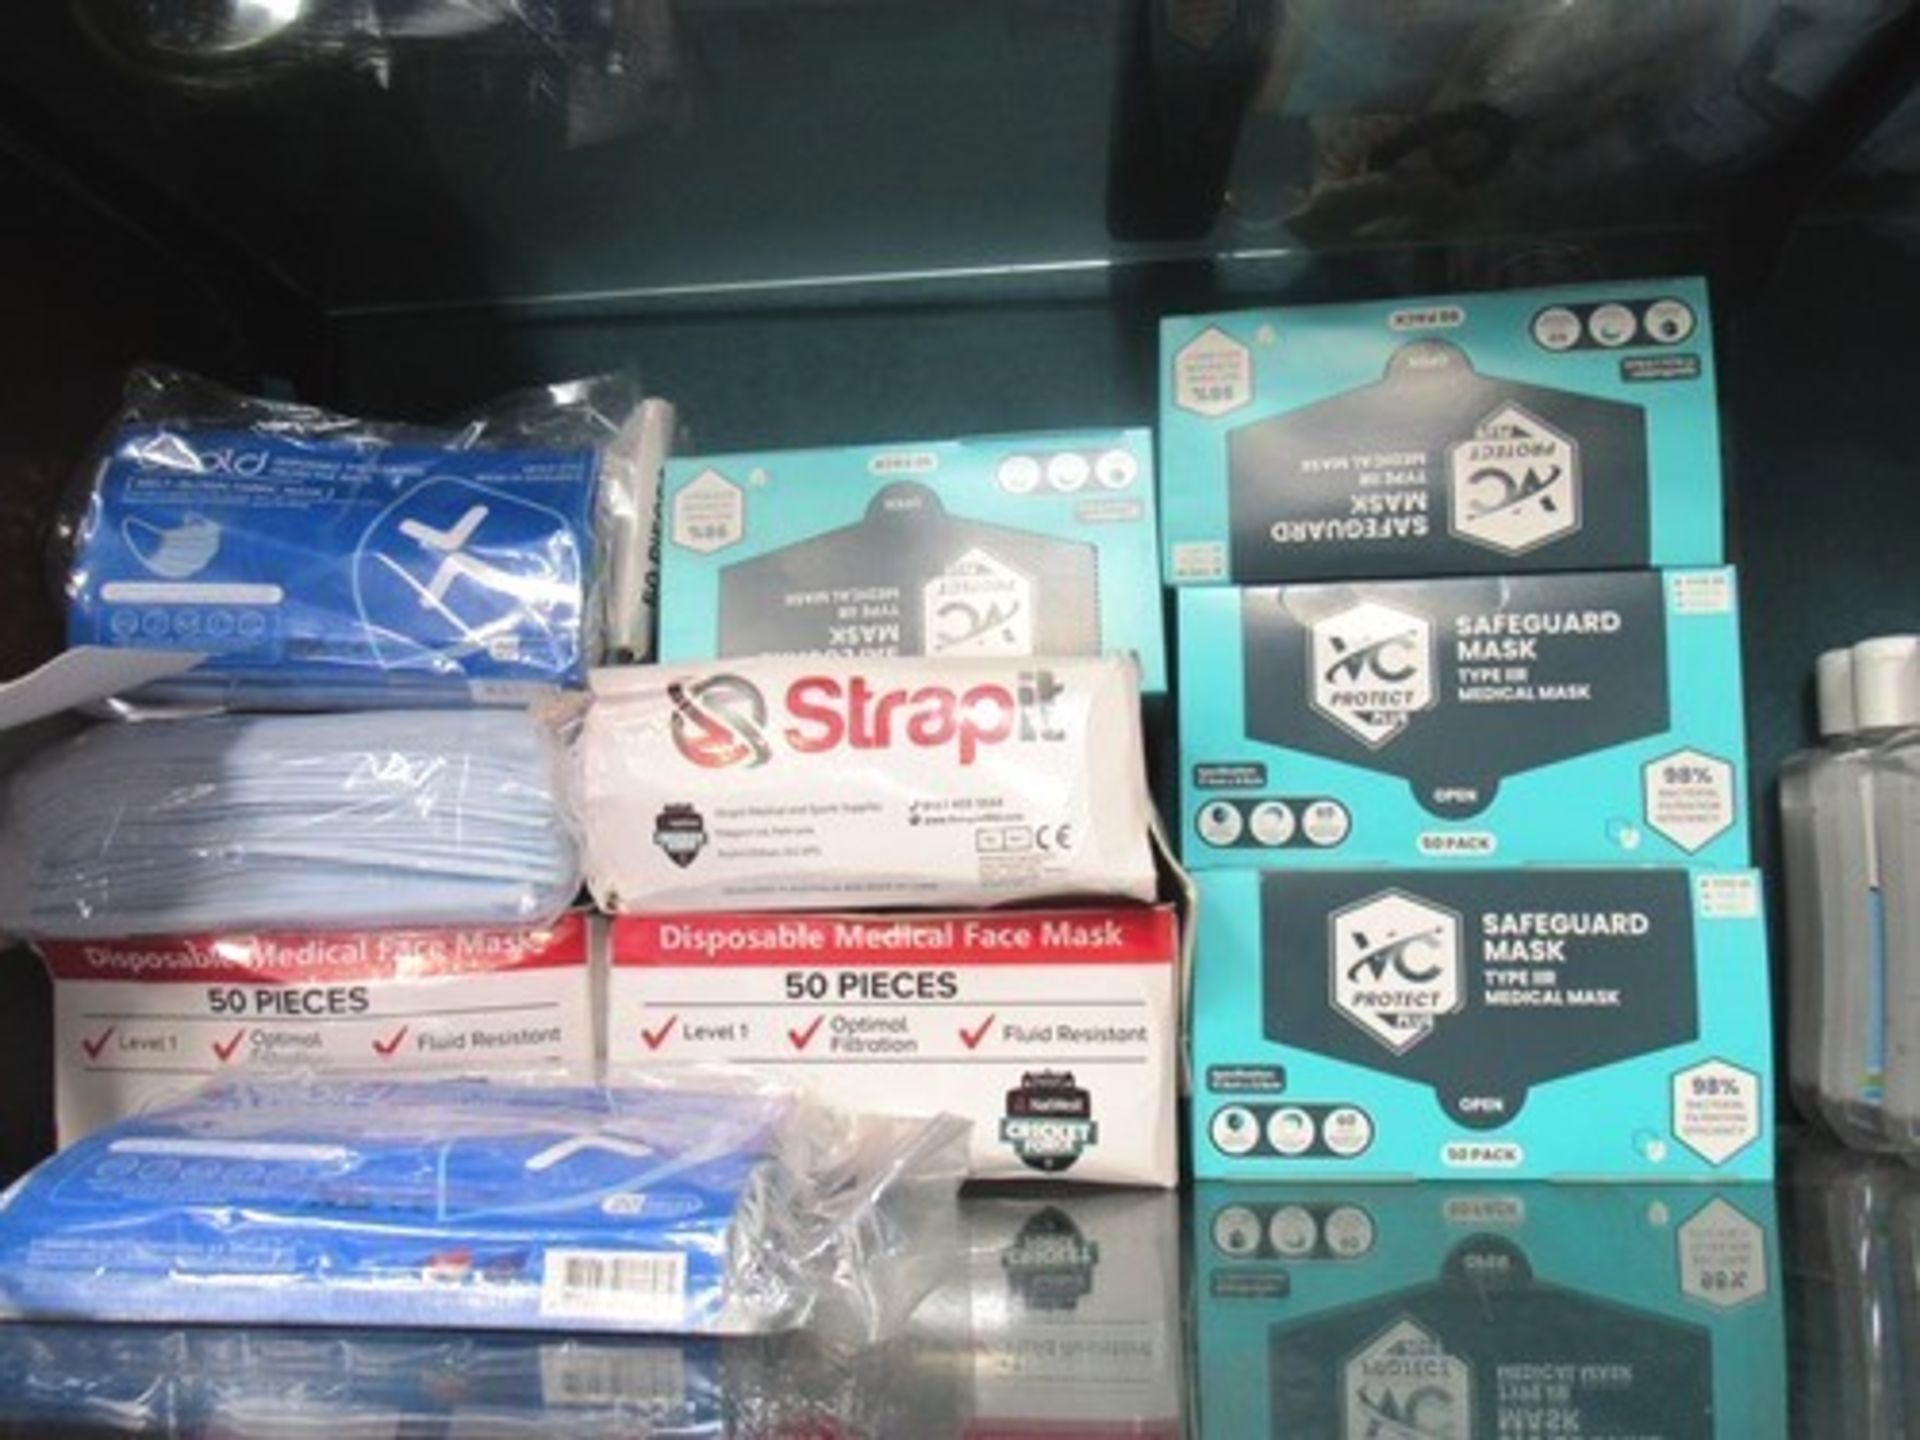 8 x boxes each containing 50 x masks and 2 x packs of 20 medical masks, brands include VC Deold